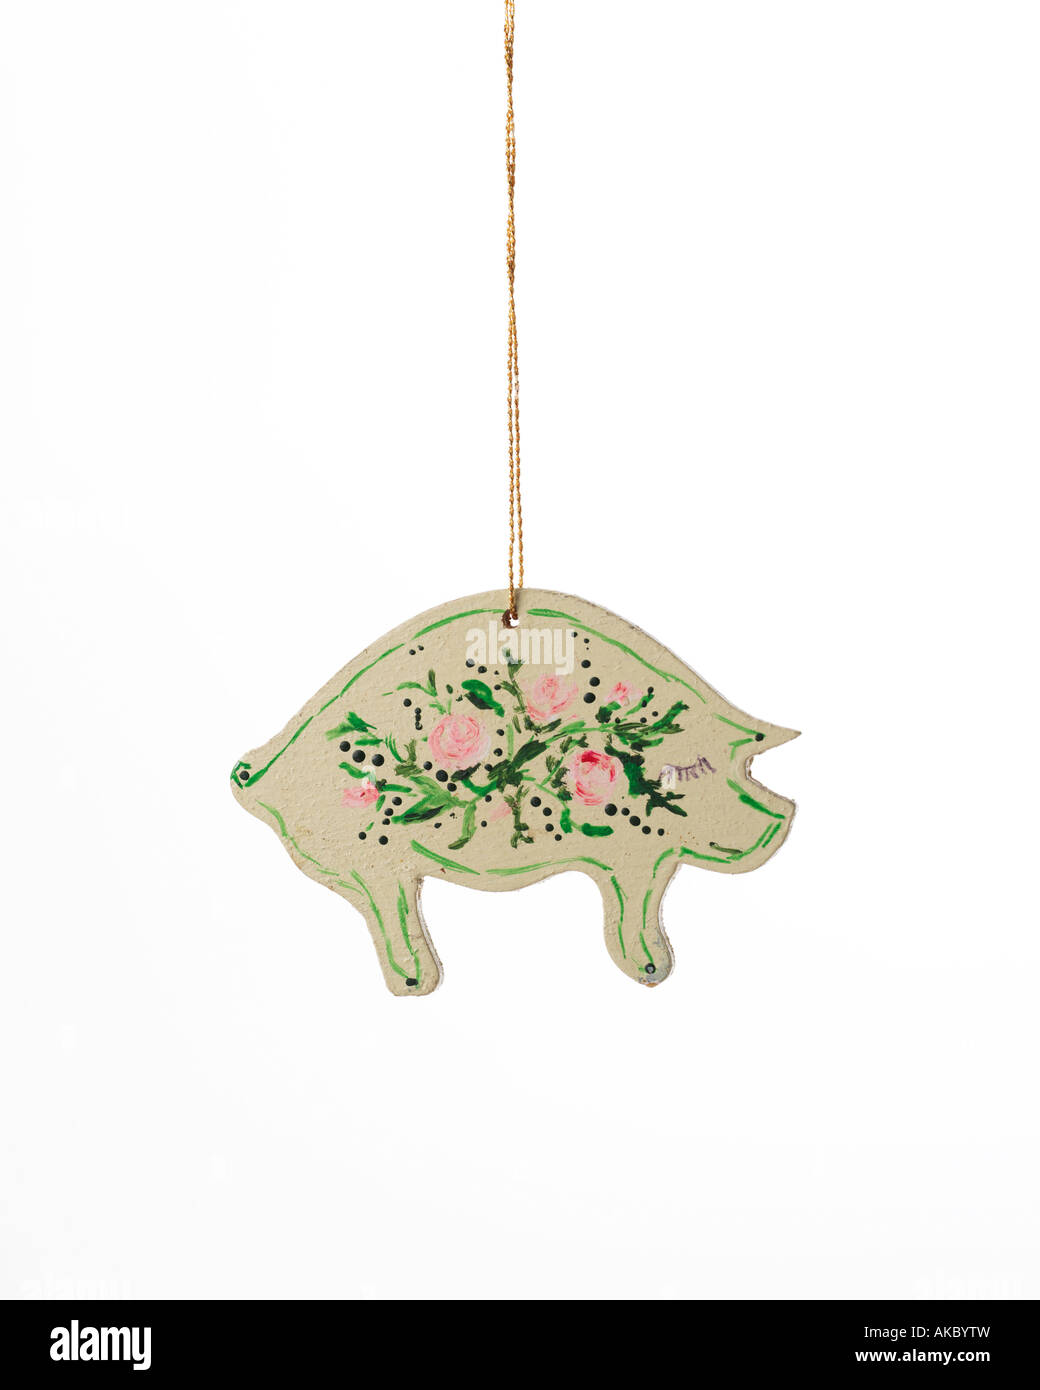 vintage Christmas ornament  decoration of pig with hand-painted flowers on its back and hanging from gold thread Stock Photo